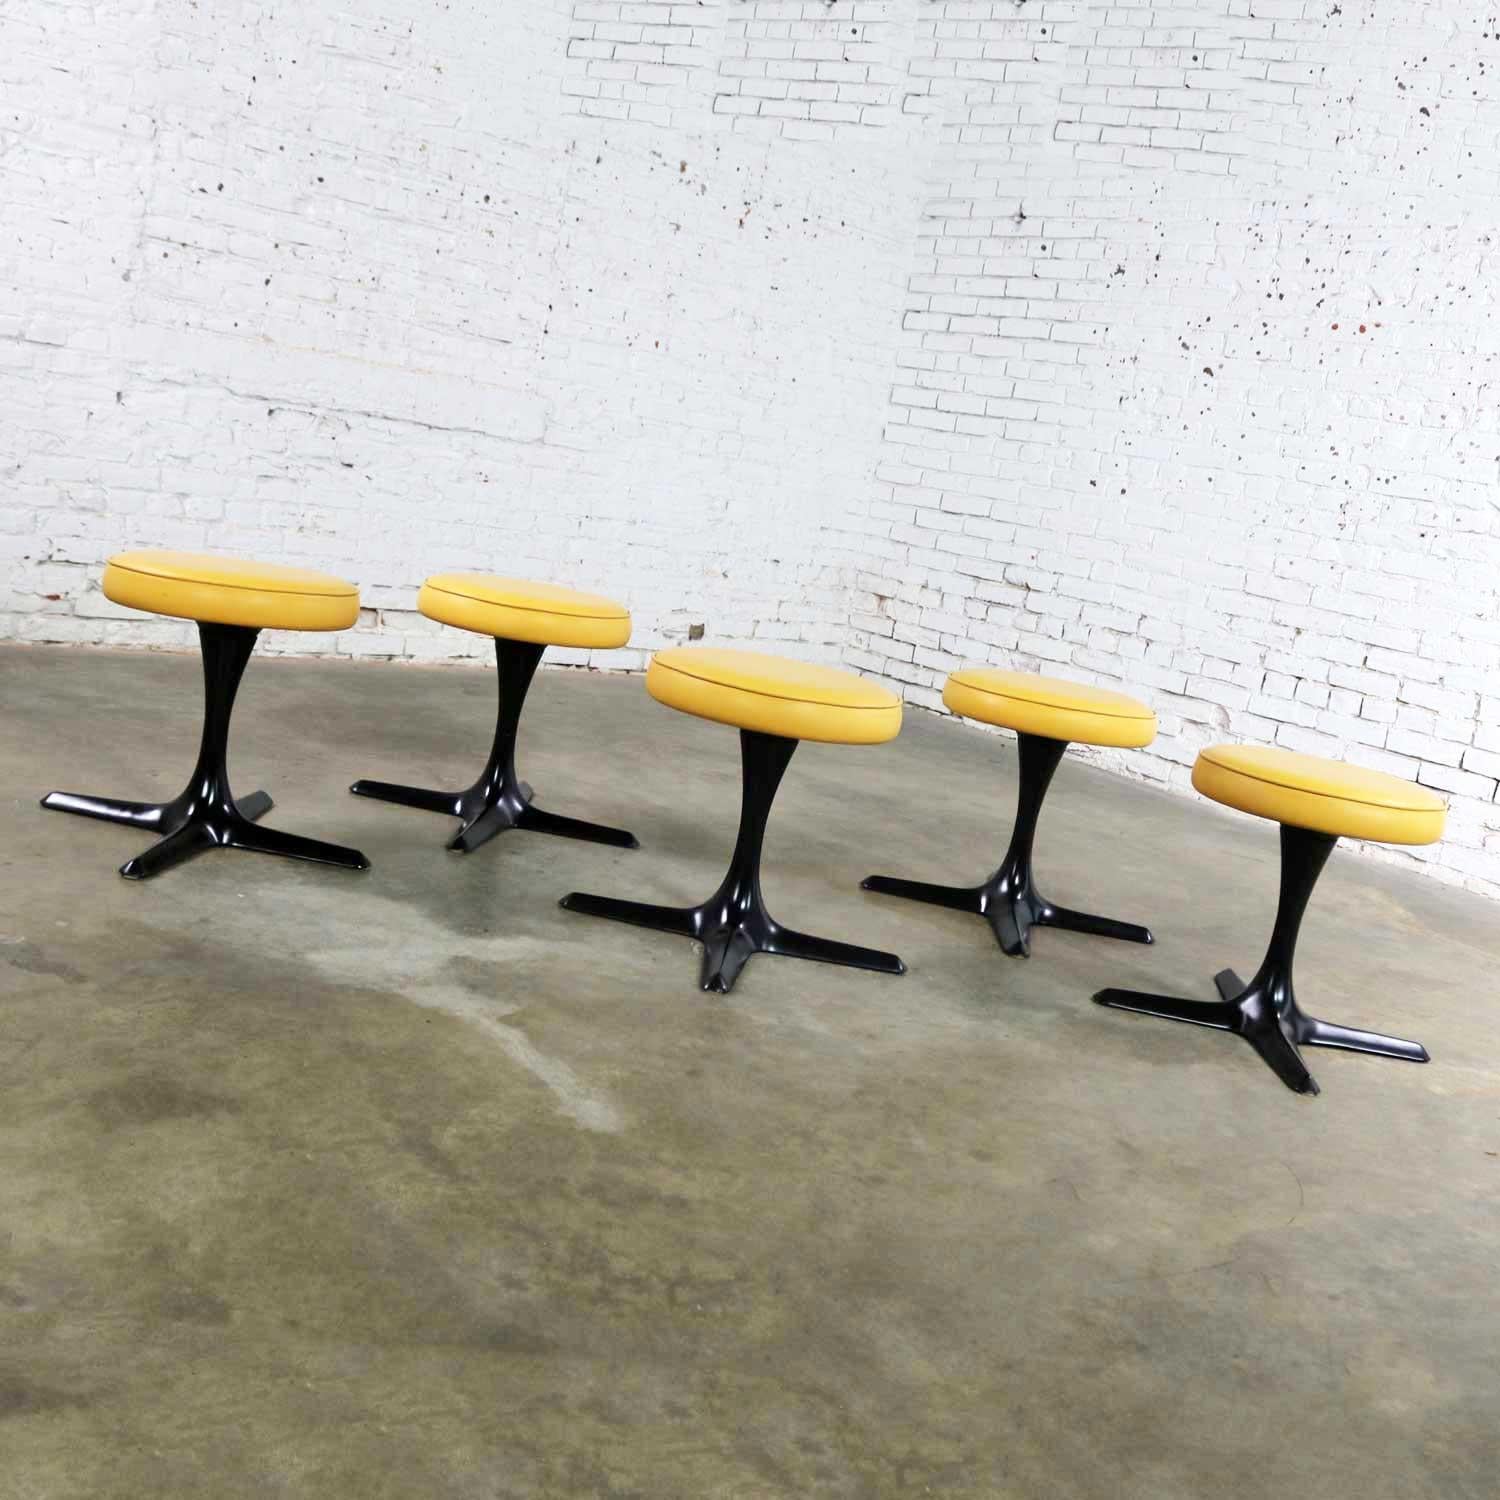 Fabulous set of 5 Mid-Century Modern tulip style swivel low stools by Burke Division for Brunswick. They have their original yellow-orange vinyl or faux leather upholstery. It may not be perfect, but it certainly is usable. We have restored the